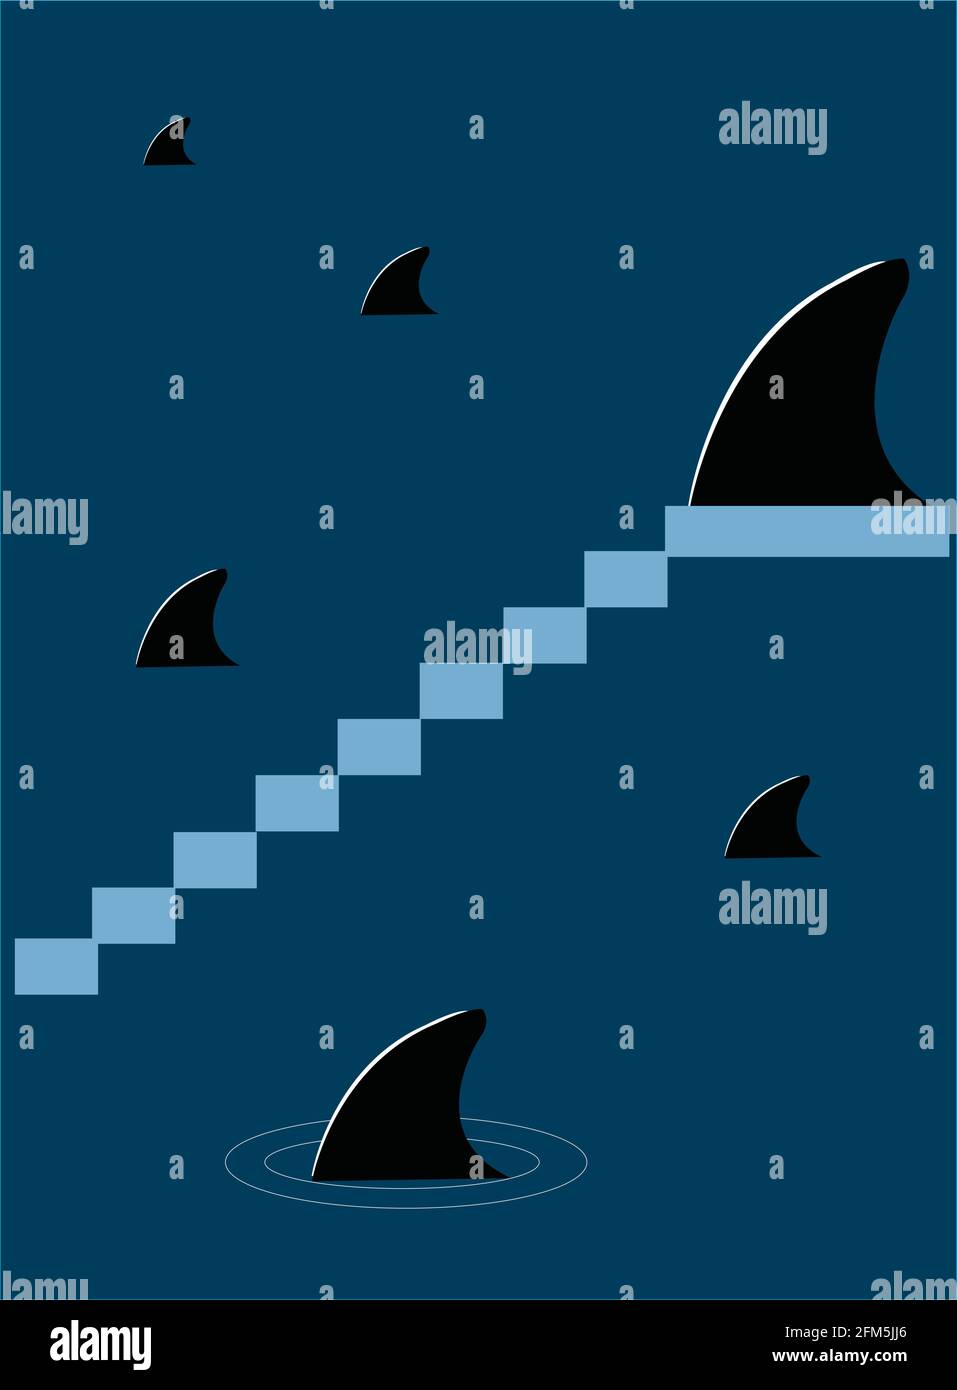 illustration of the Truman show idea with sharks coming out of the water to simbolize danger in a fake illusory world Stock Vector